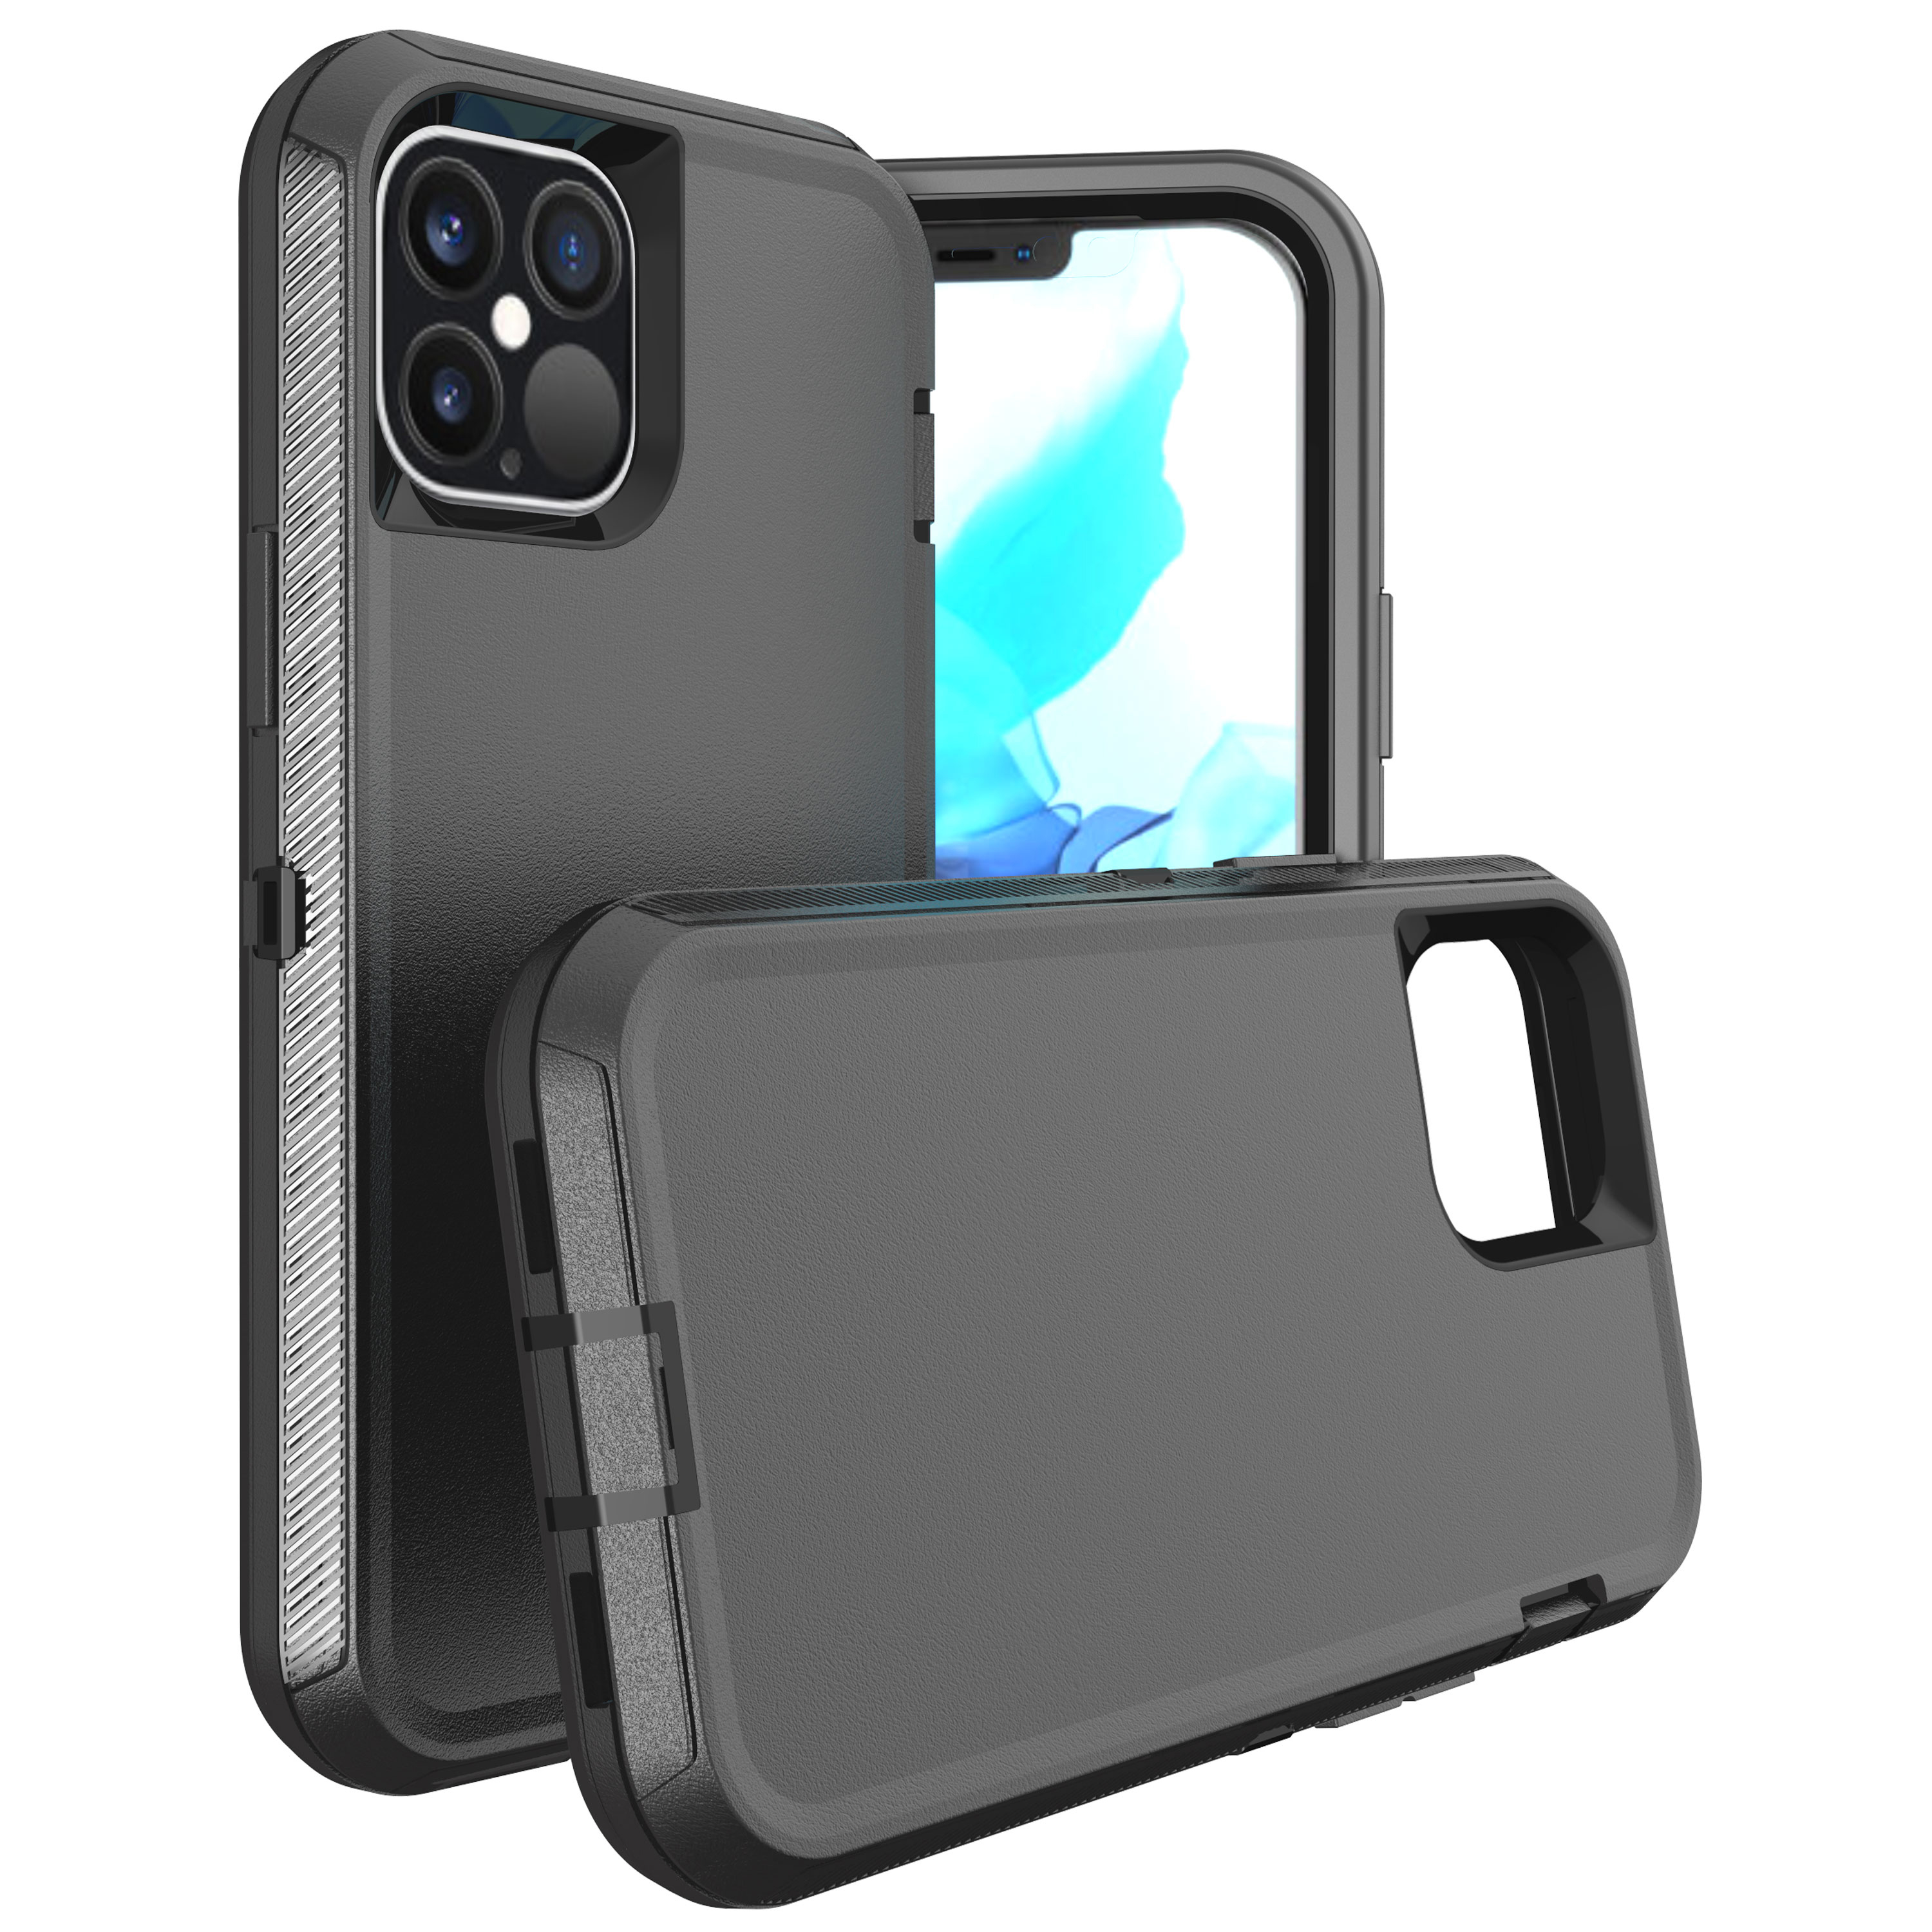 Armor Robot Case for IPHONE 12 Pro Max 6.7 (Black)